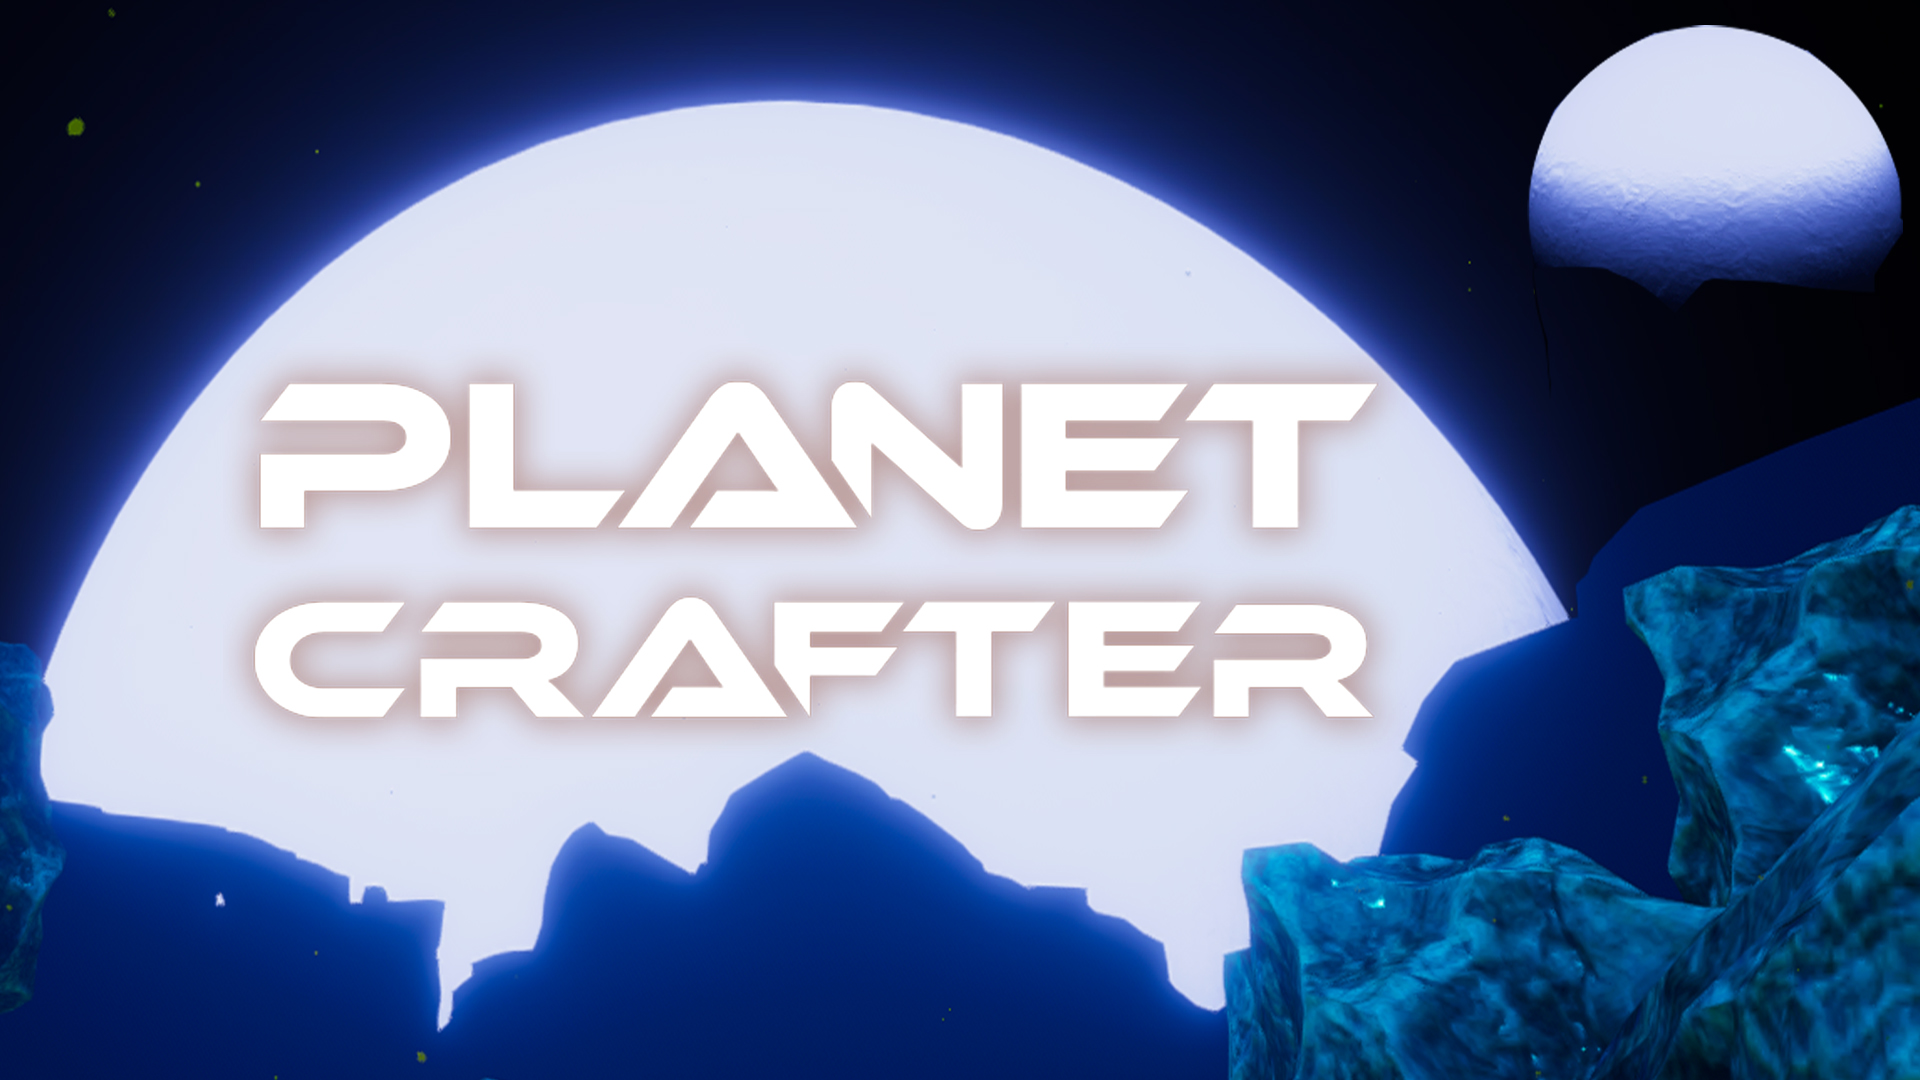 The Planet Crafter обои. The planet crafter читы